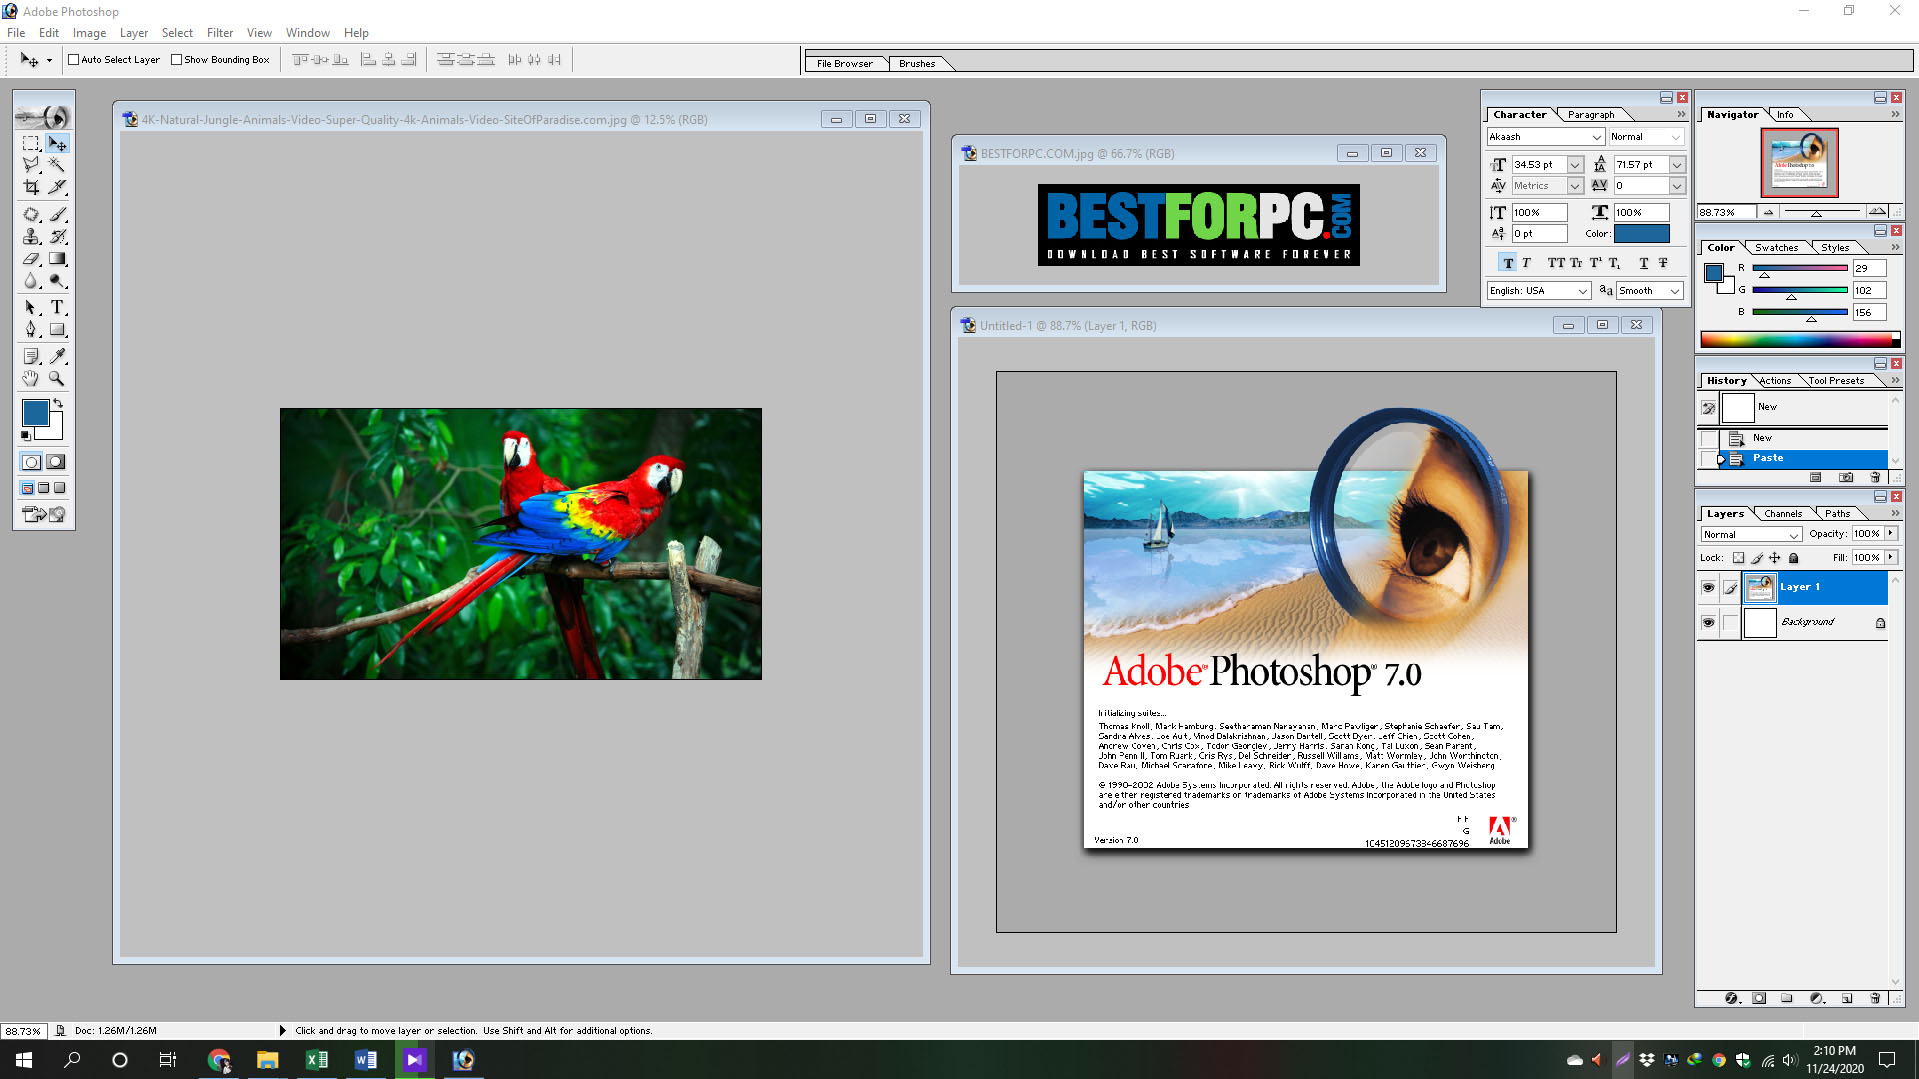 adobe photoshop new version 2014 free download for windows 7